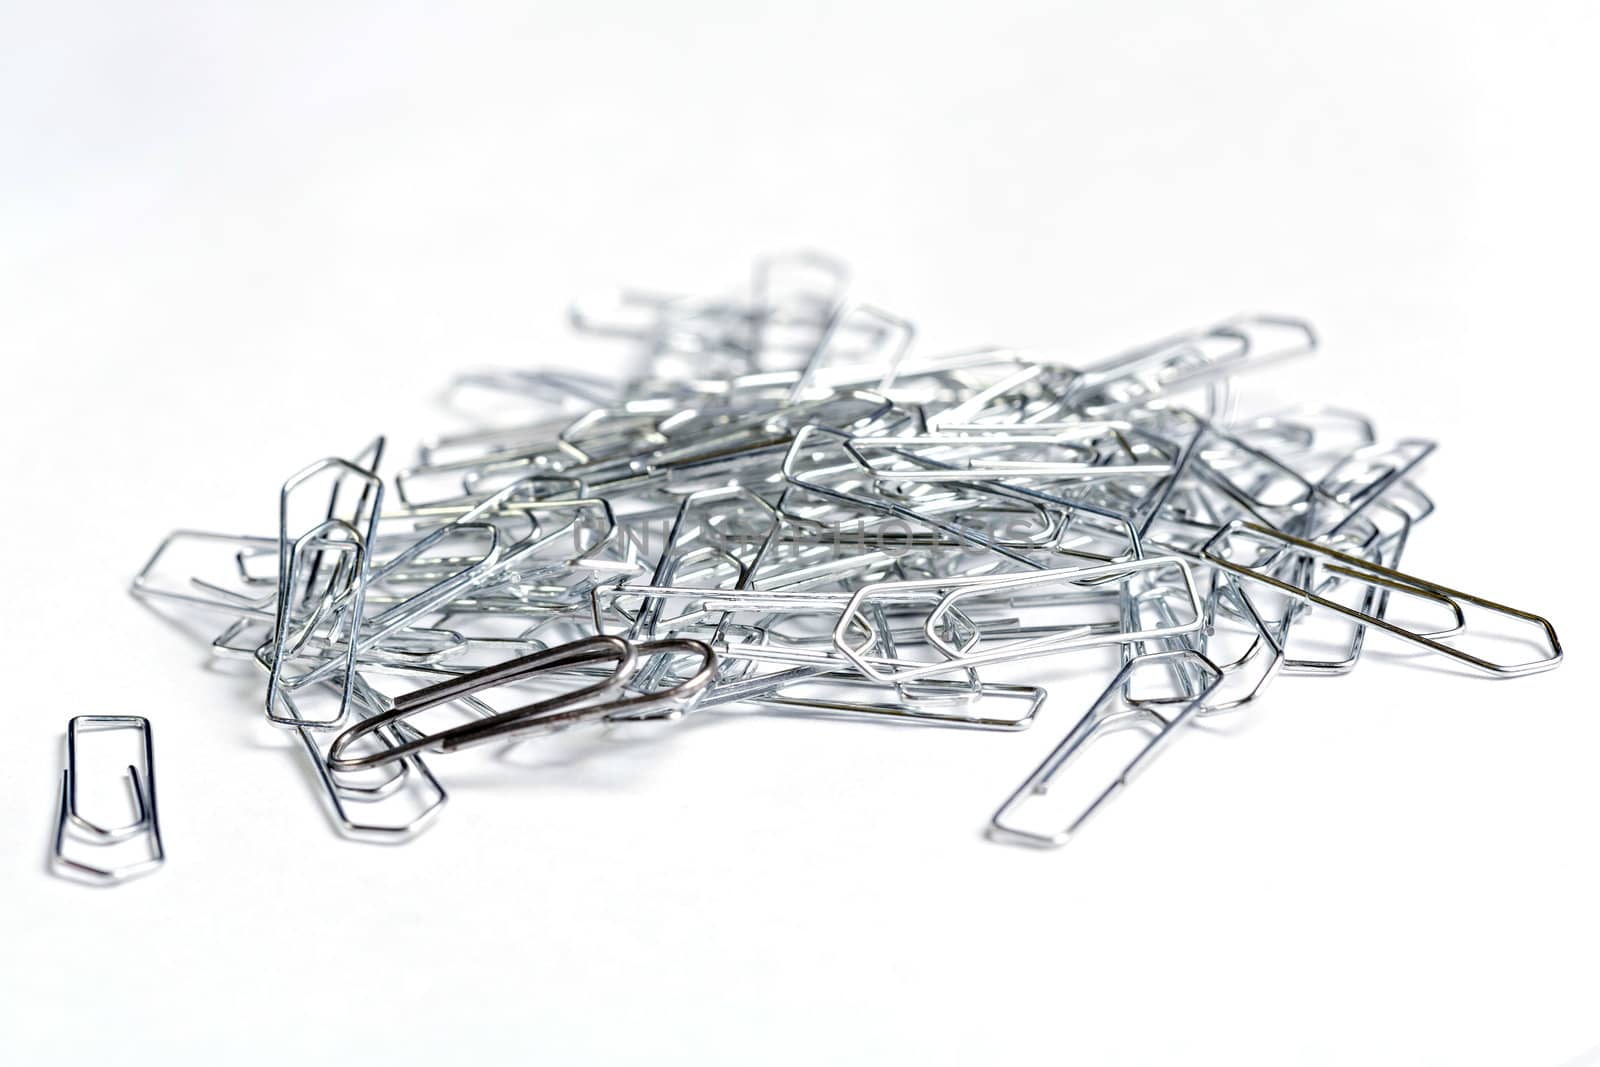 Bunch Of Paper-Clips by Roka